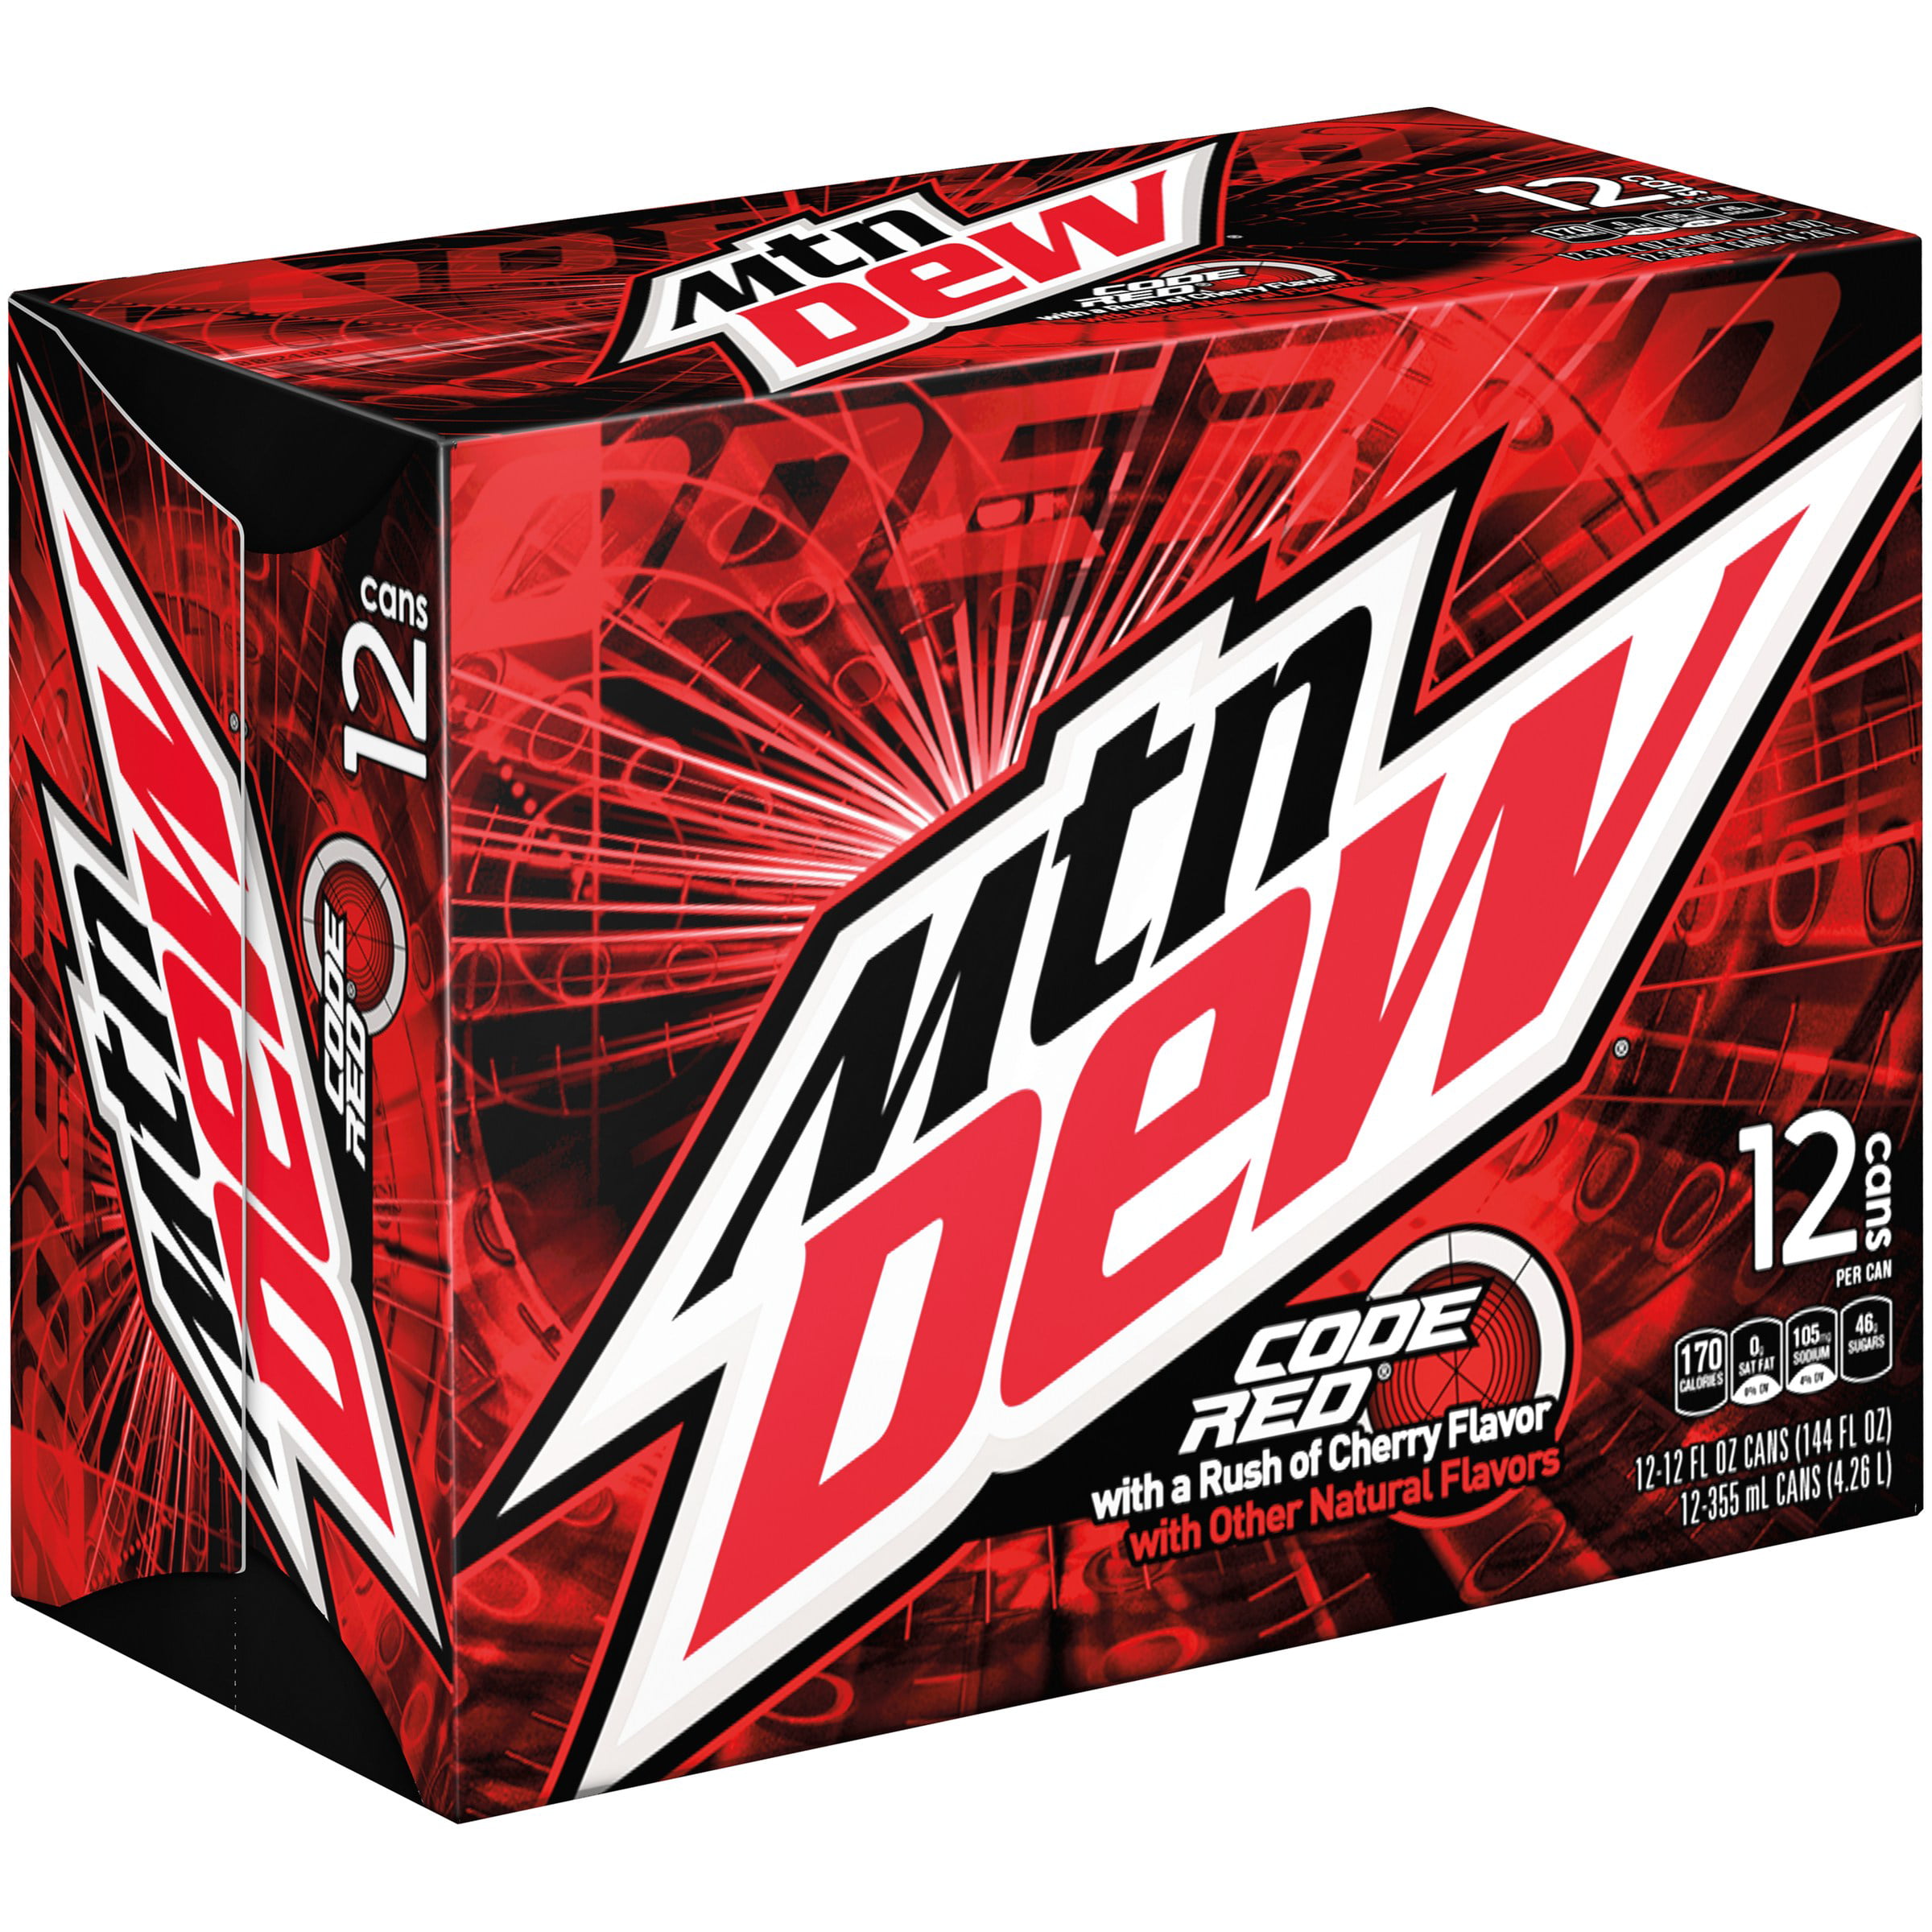 Mtn Dew Code Red Soda With A Rush Of Cherry Flavor Fl Oz Cans